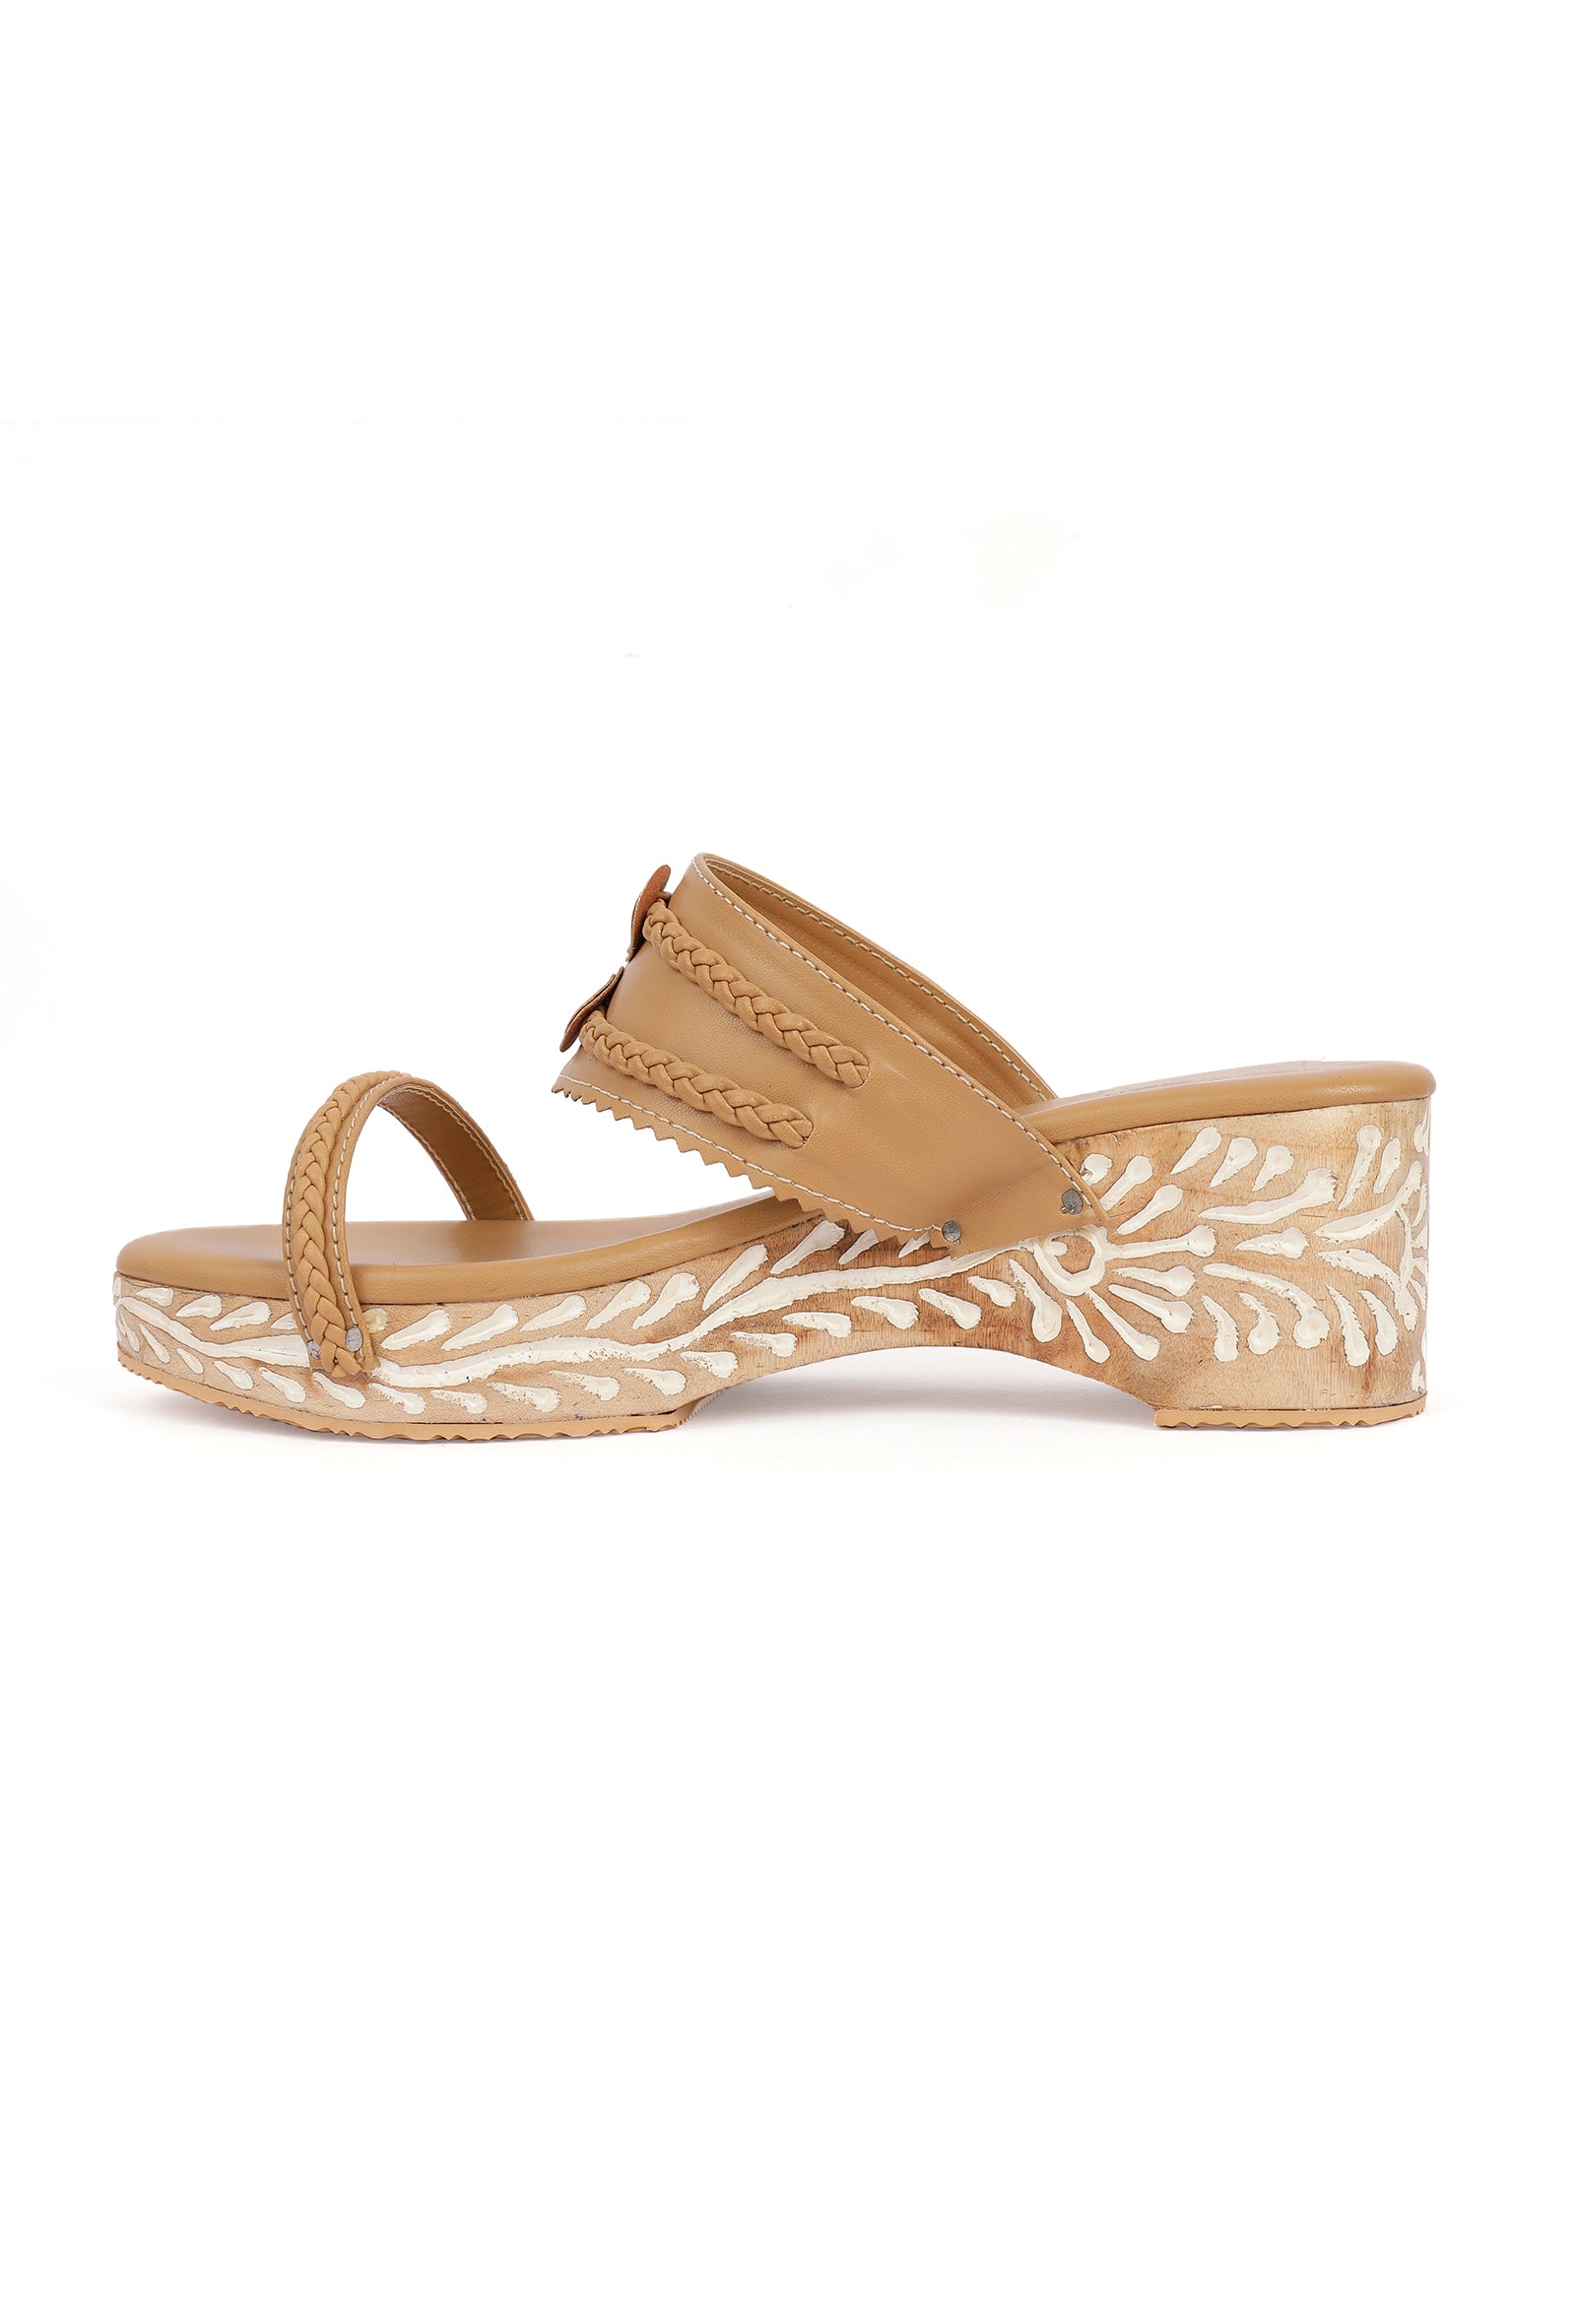 Tortilla Brown Wooden Carved Braided Wedges